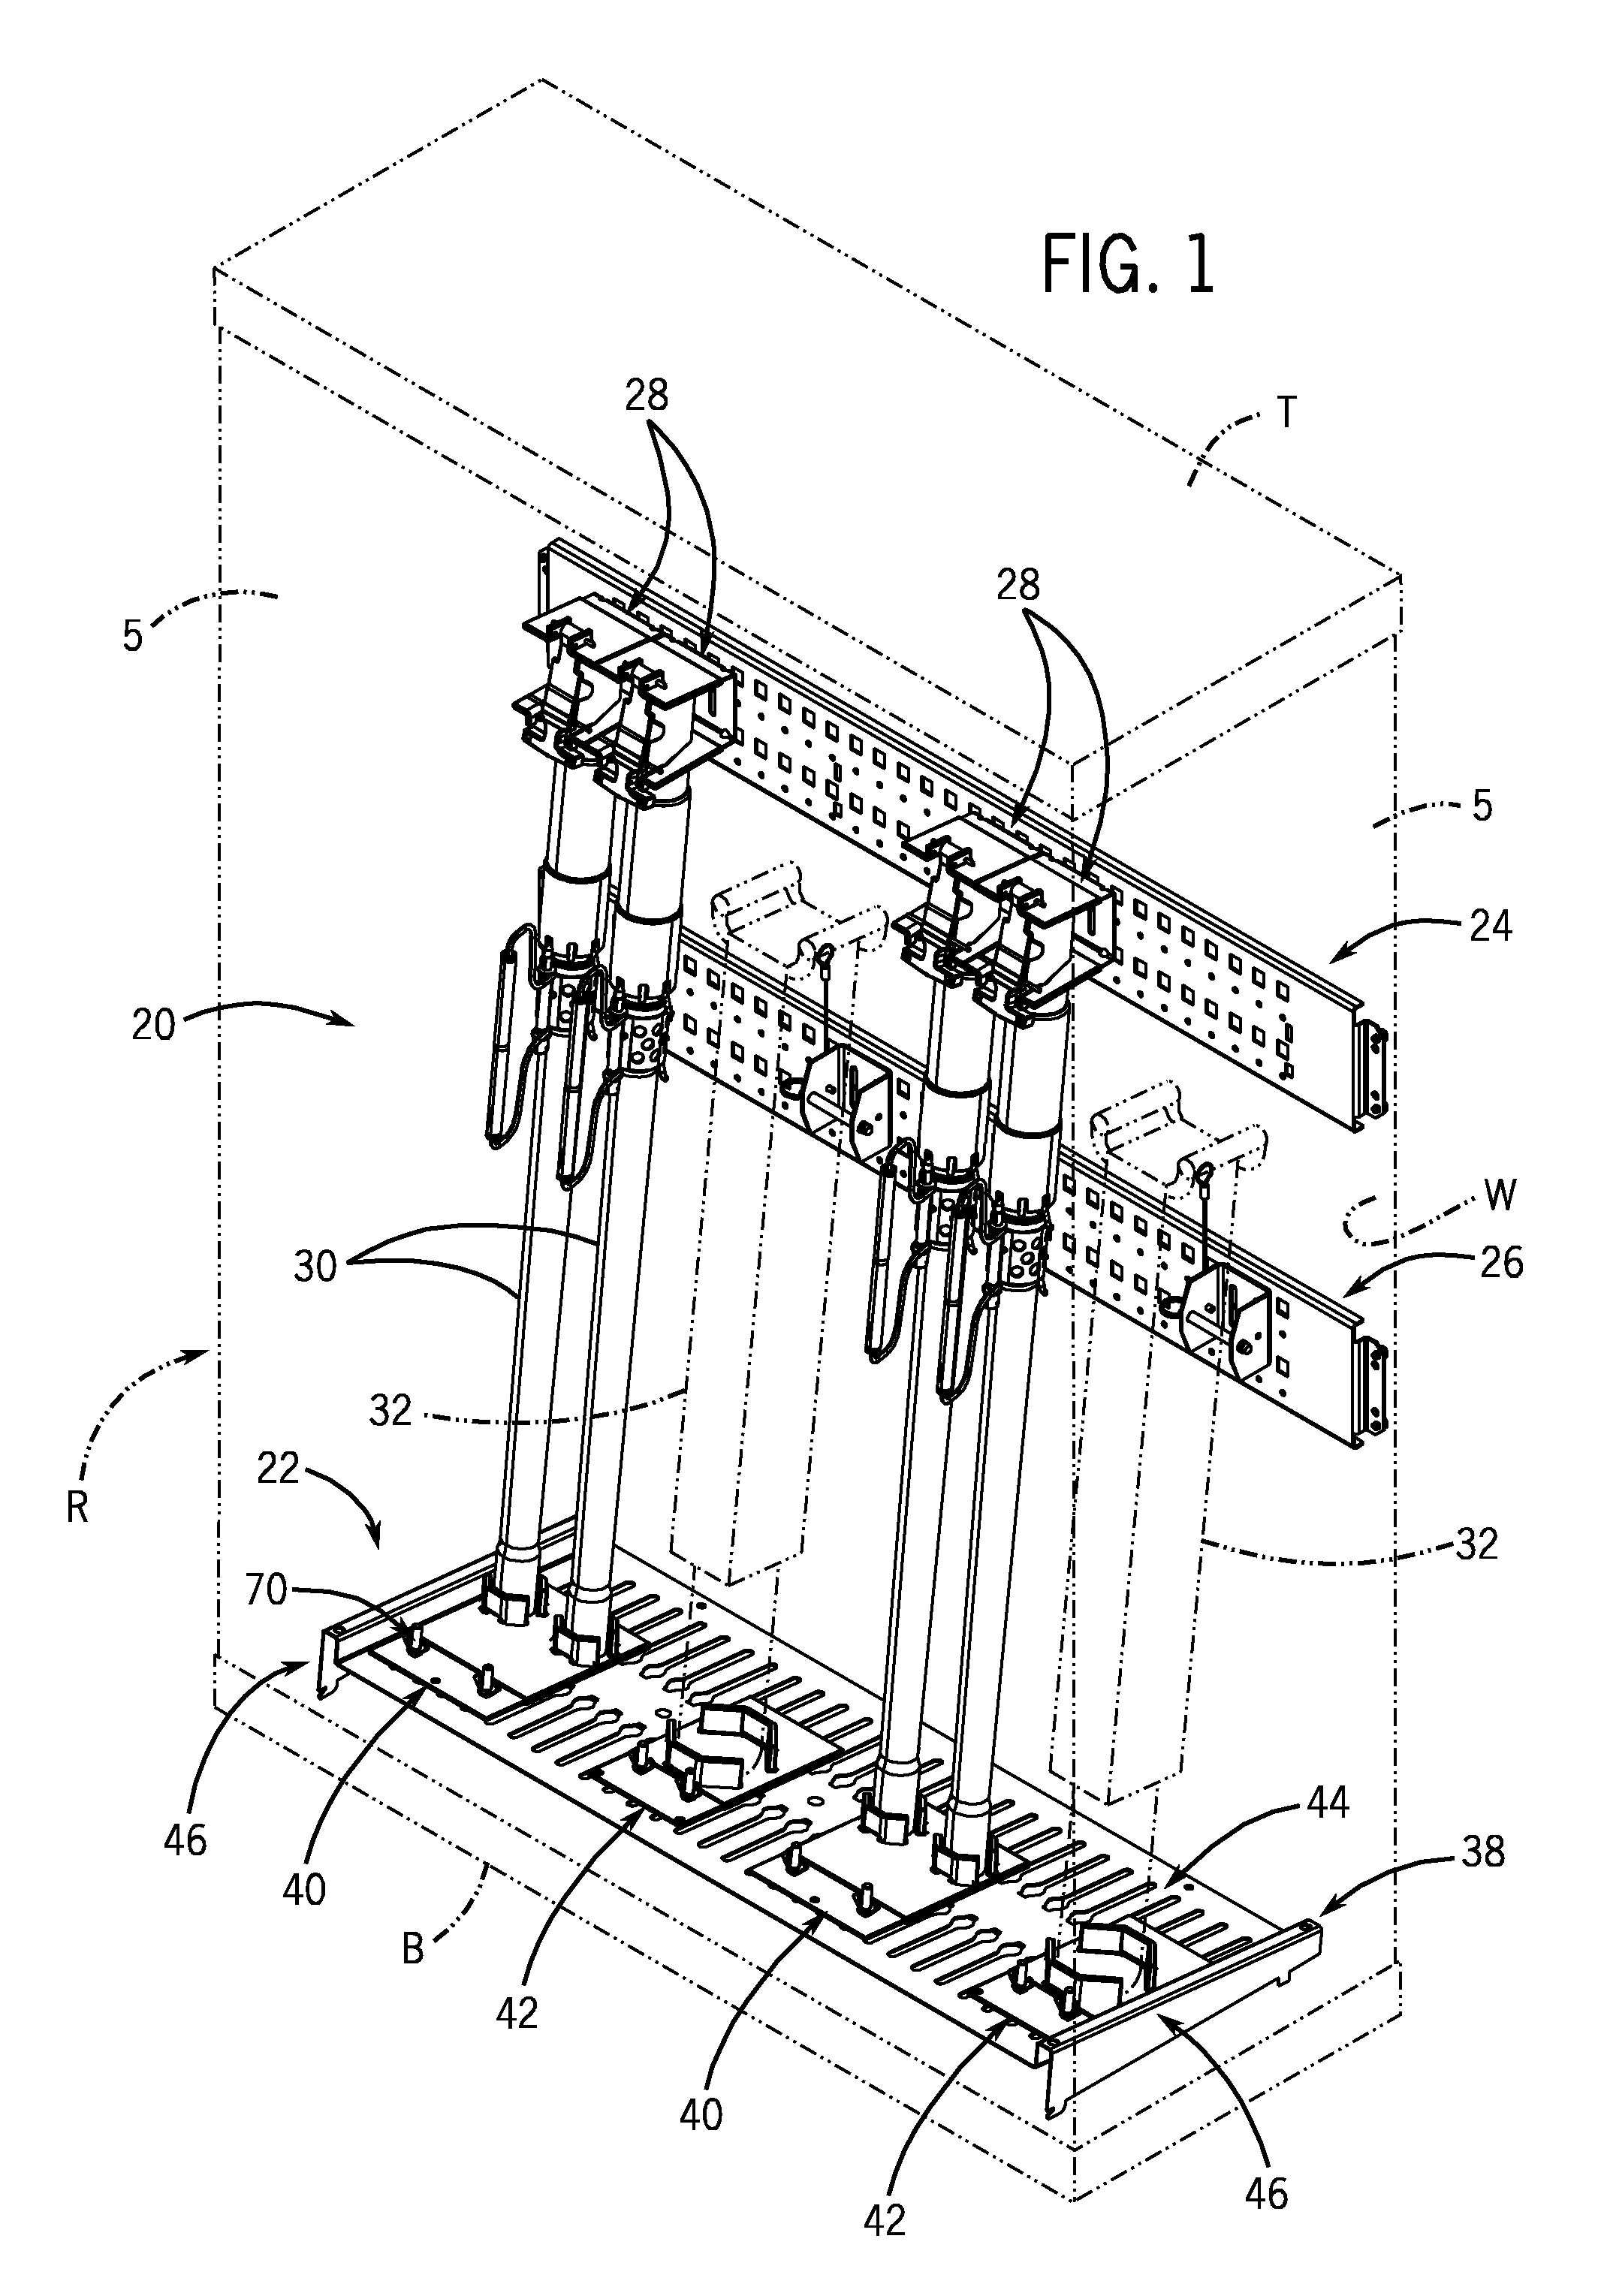 Support arrangement for the lower end of an upright elongated article, such as a firearm or related accessory